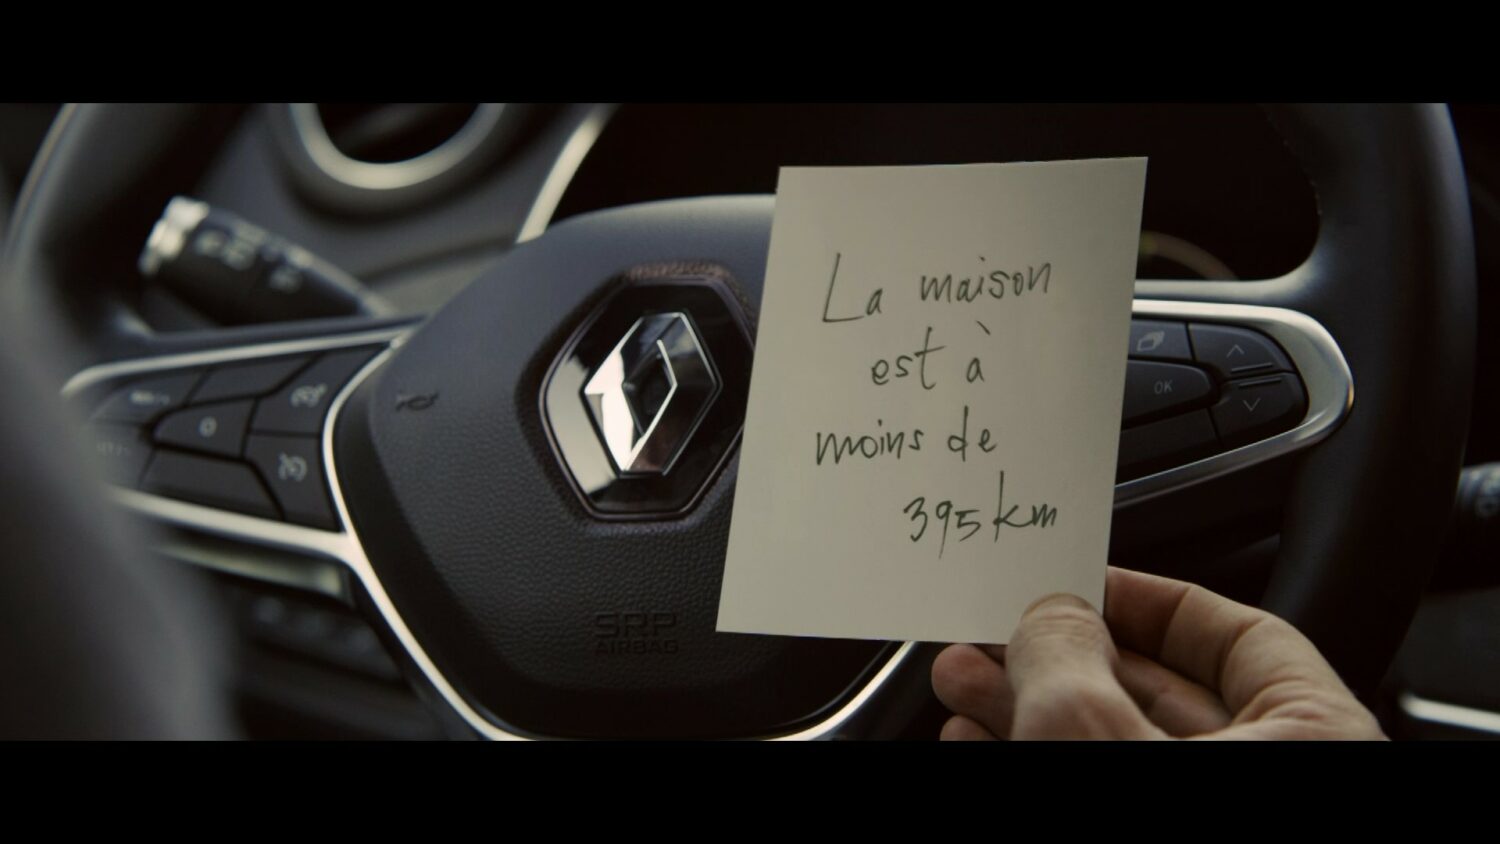 2021 - Renault ZOE advertising campaign - The Chase & Leaving the nest